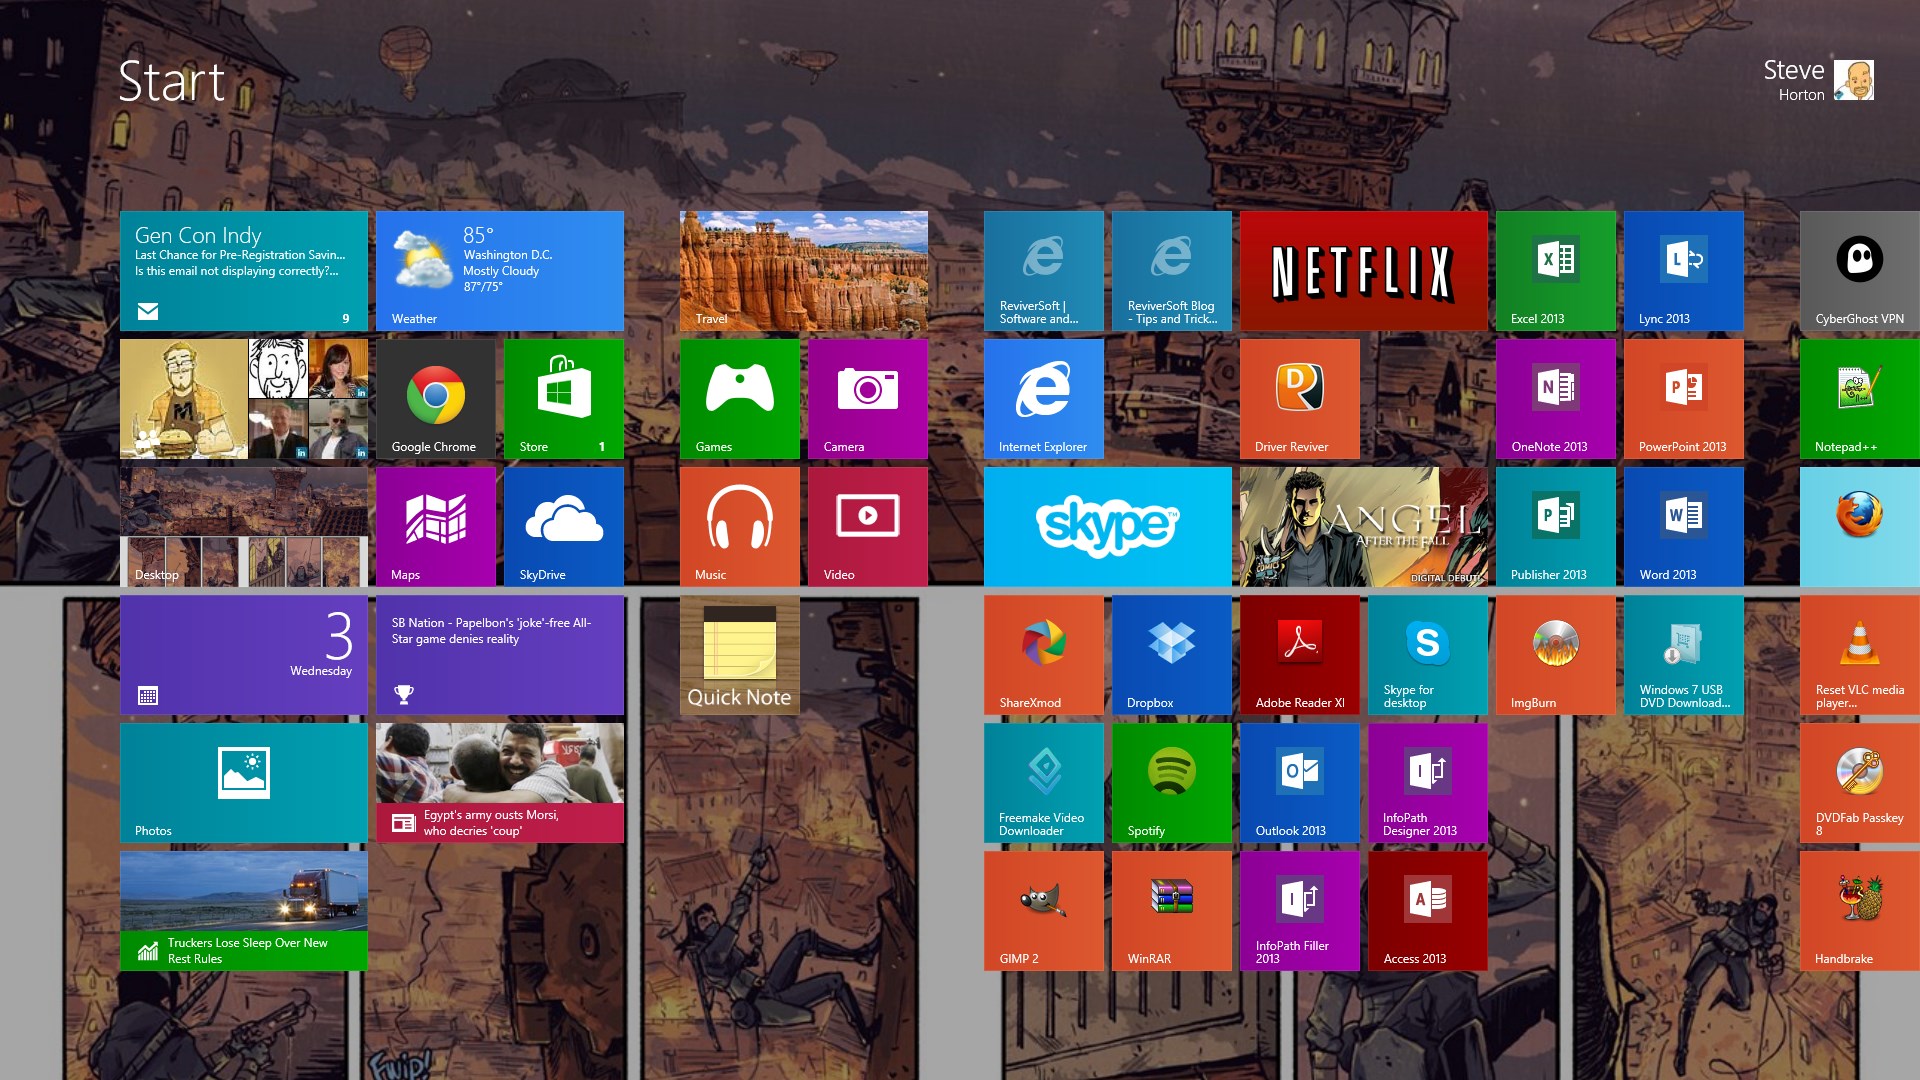 How do I use the same background image on my Windows 8.1 desktop and Start Screen?